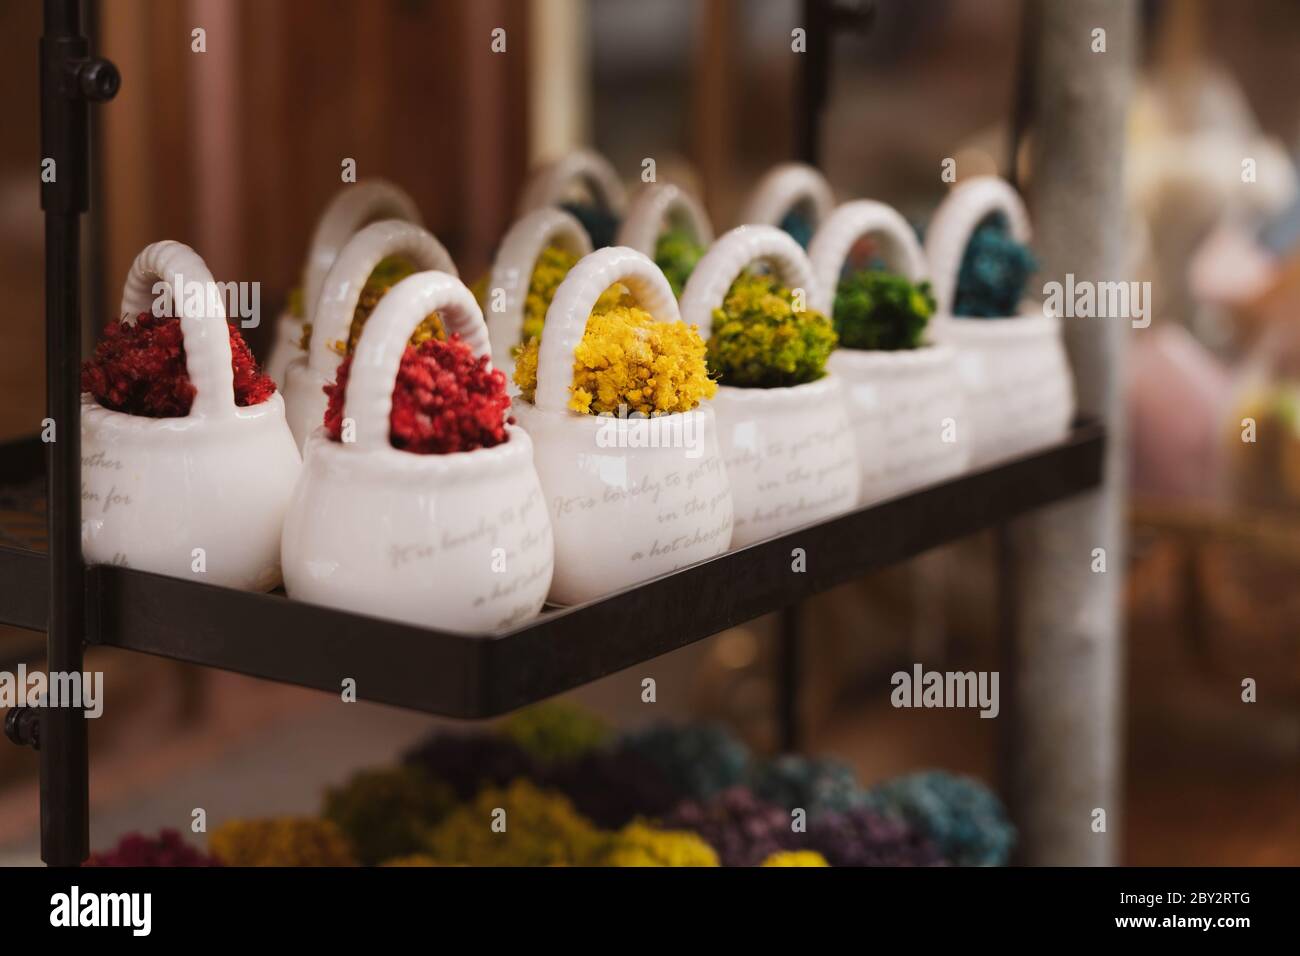 Close up image of mini small colorful plant decorations on a white ceramic flower vase. Decorative flowers displayed on a black shelf. Stock Photo